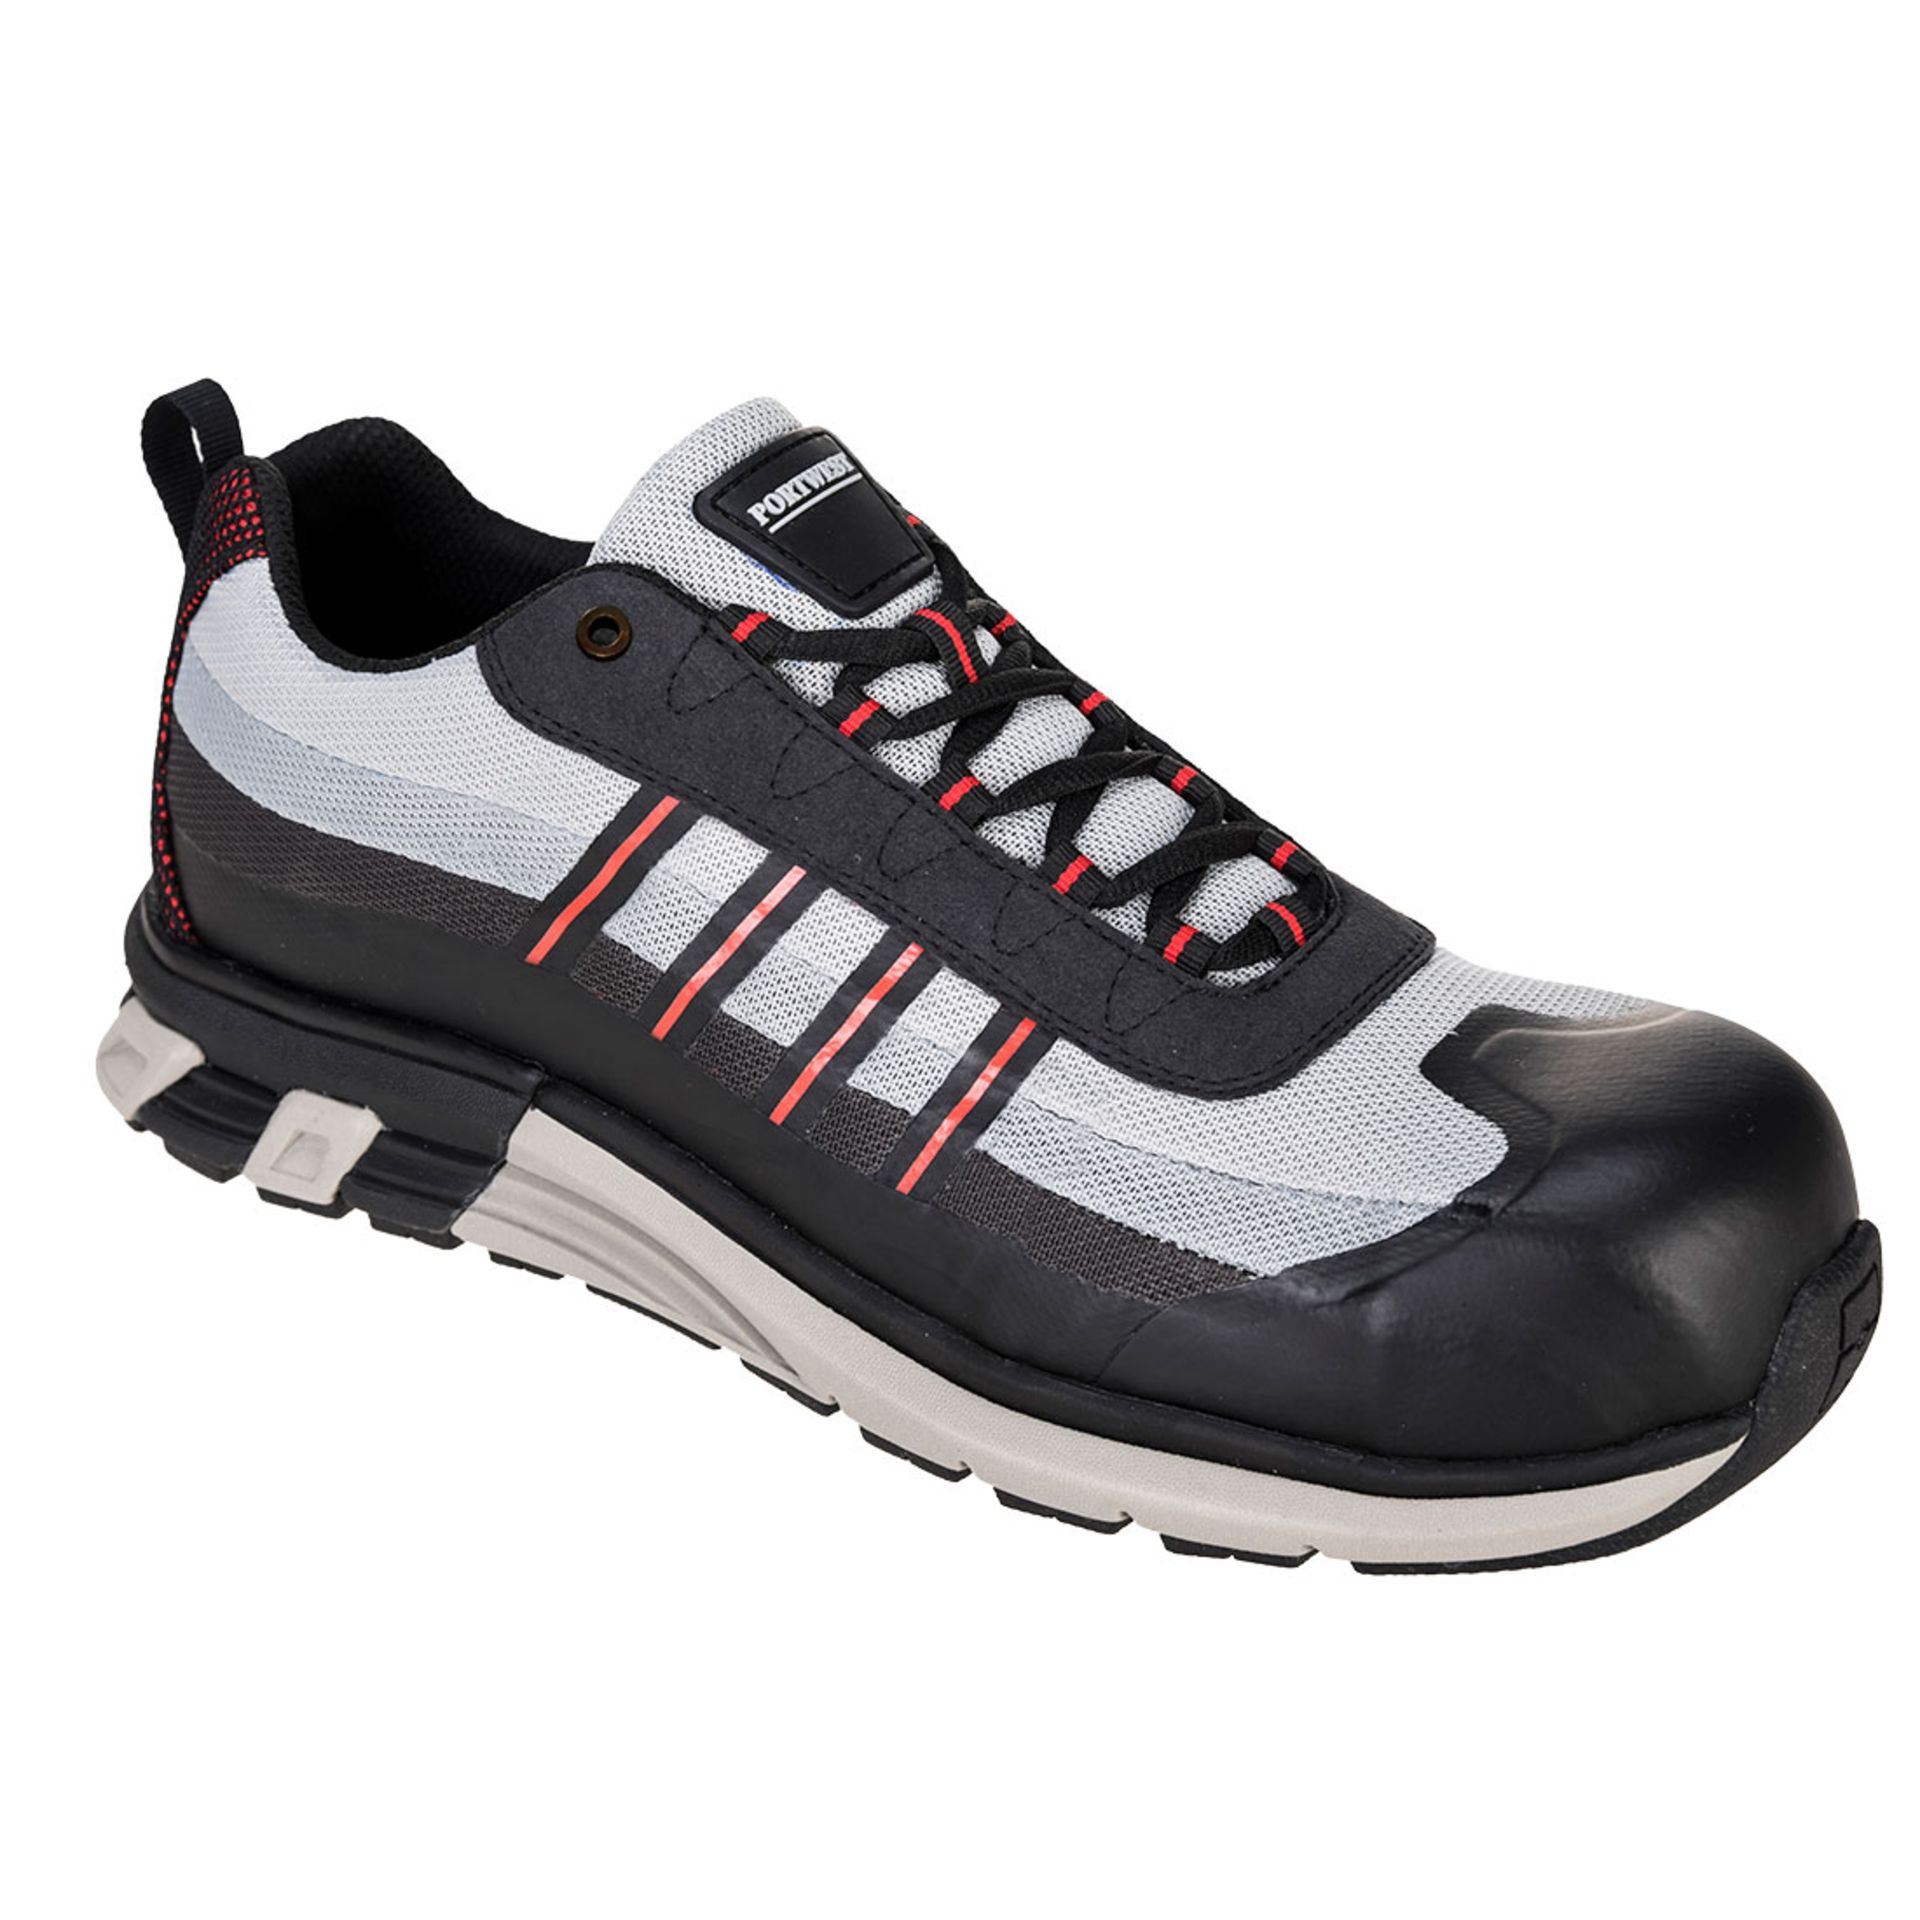 BRAND NEW PORTWEST FT16 OlymFlex London SBP AE Trainer GRE/BLACK SIZE 10. RRP £45. (PW). (